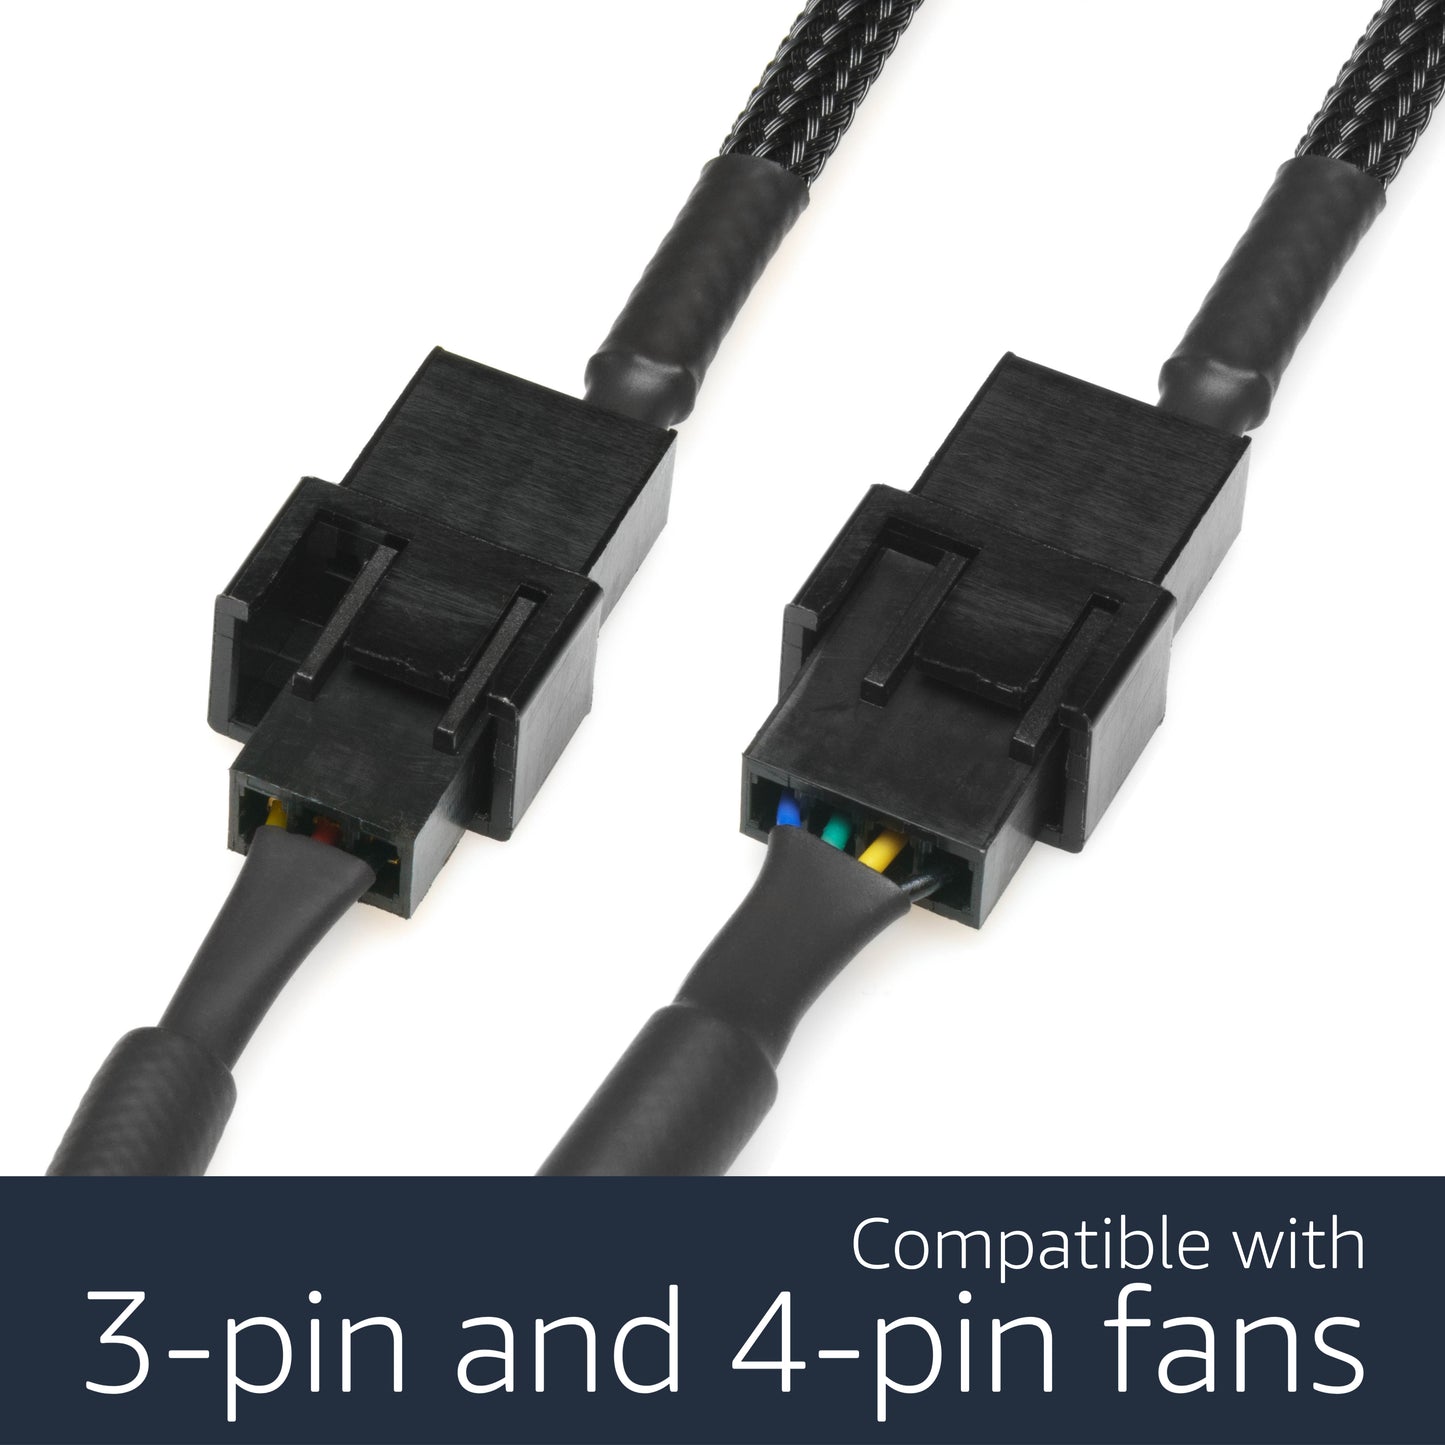 USB 12V to 4-Pin Fan Power Adapter Cable